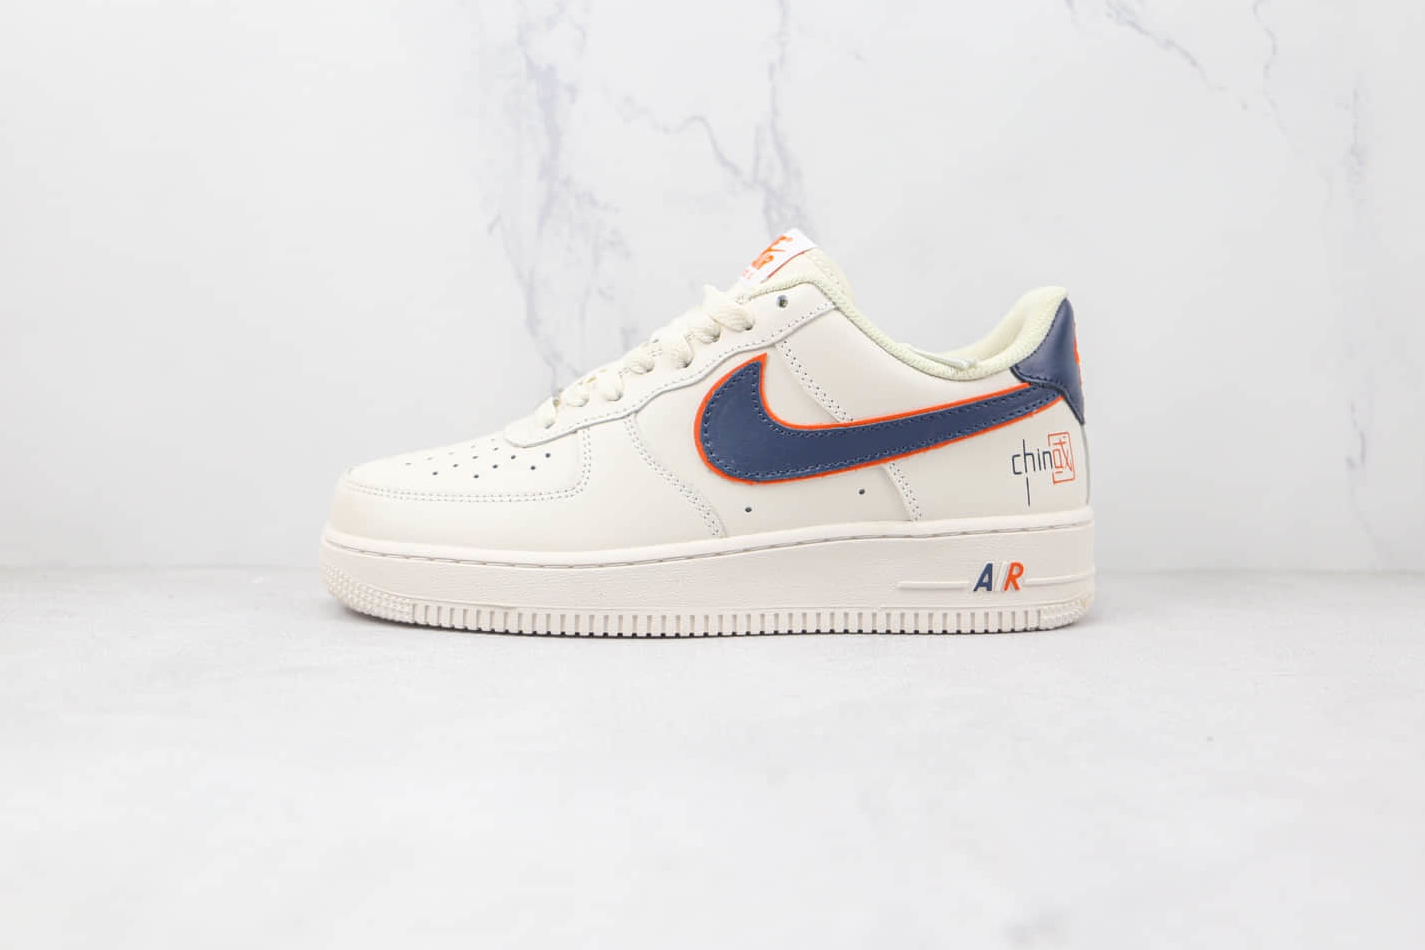 Nike Air Force 1 07 Low White Blue Orange Shoes - BS8871-101 | Shop Now!